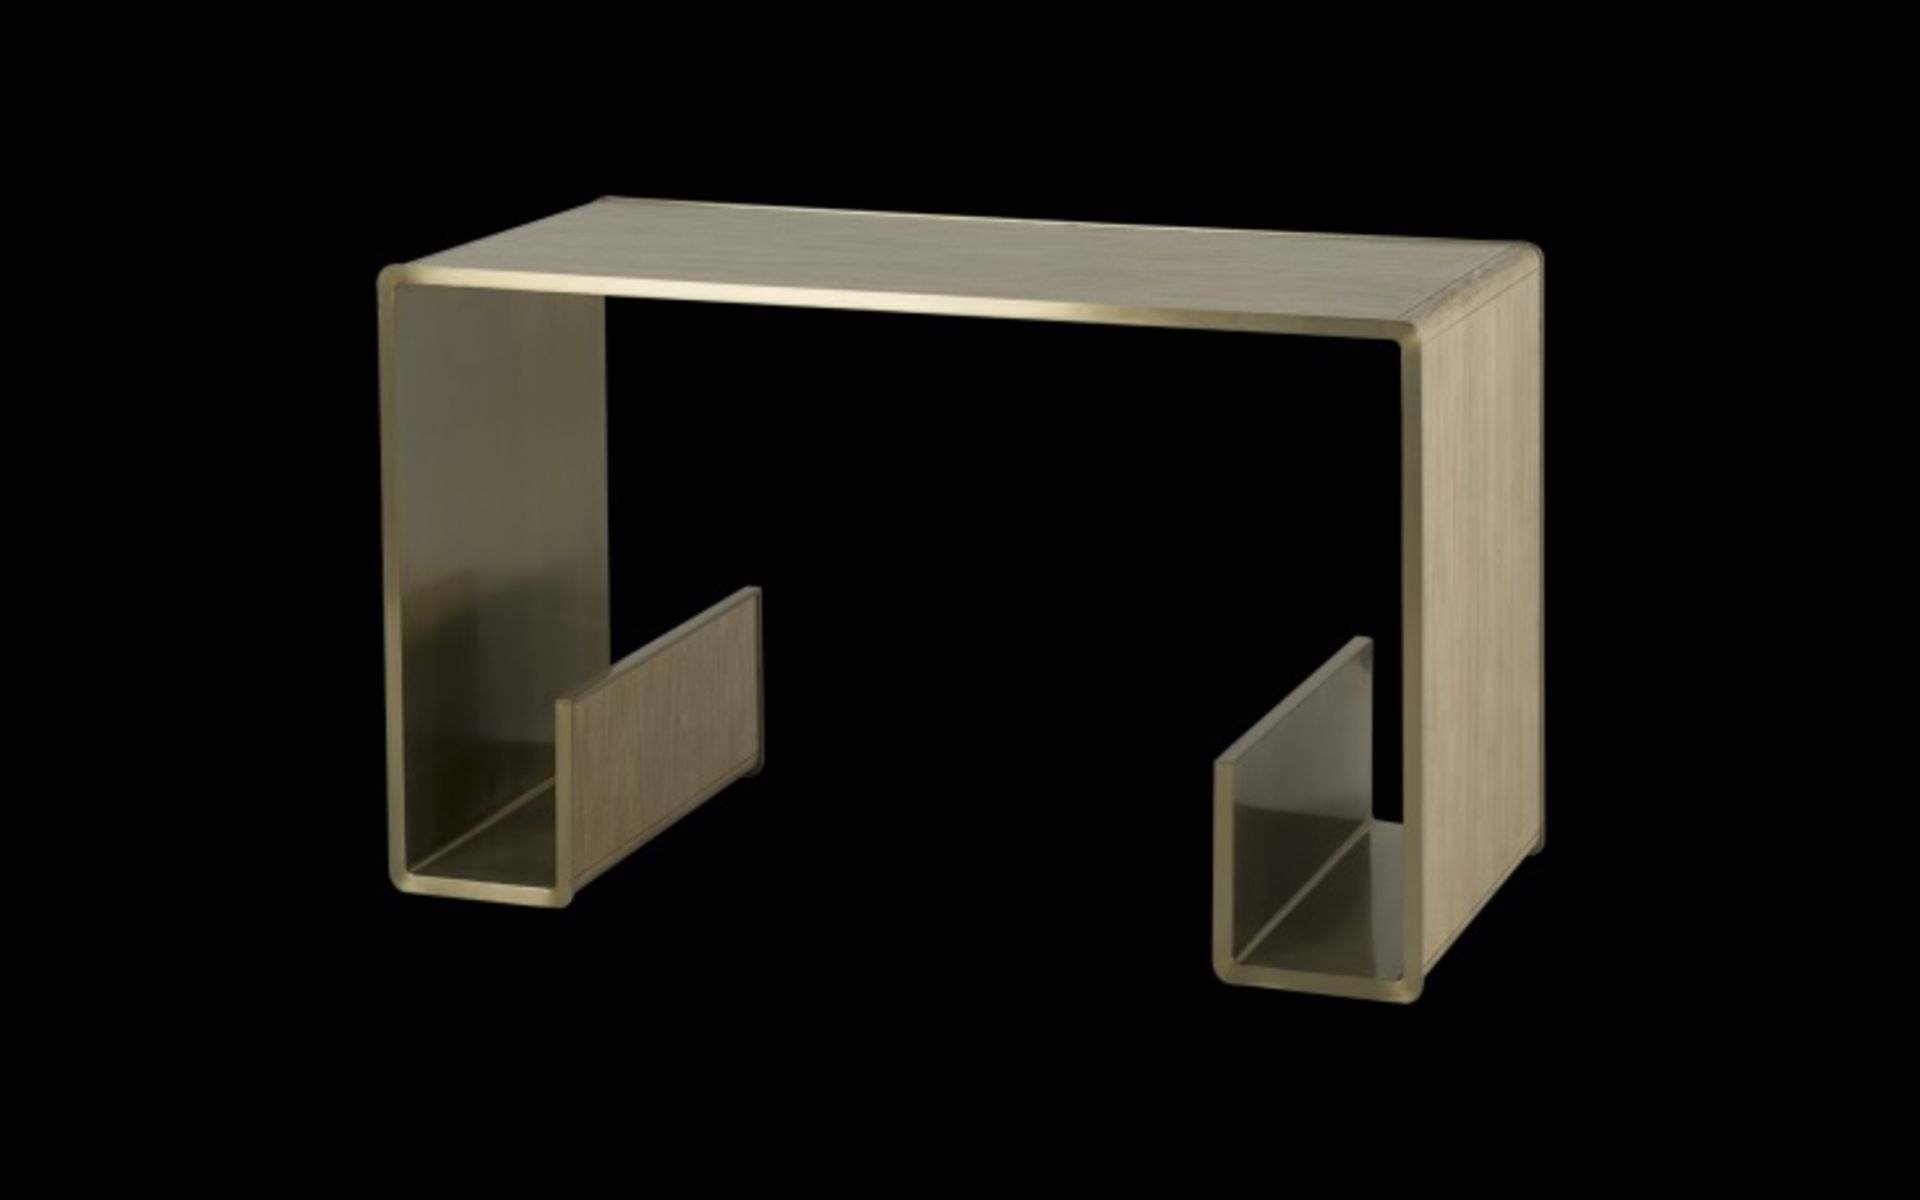 Kelly Hoppen Degas Desk A Unique Piece That Showcases Kelly’s Love For Bold Design Statements And - Image 2 of 2